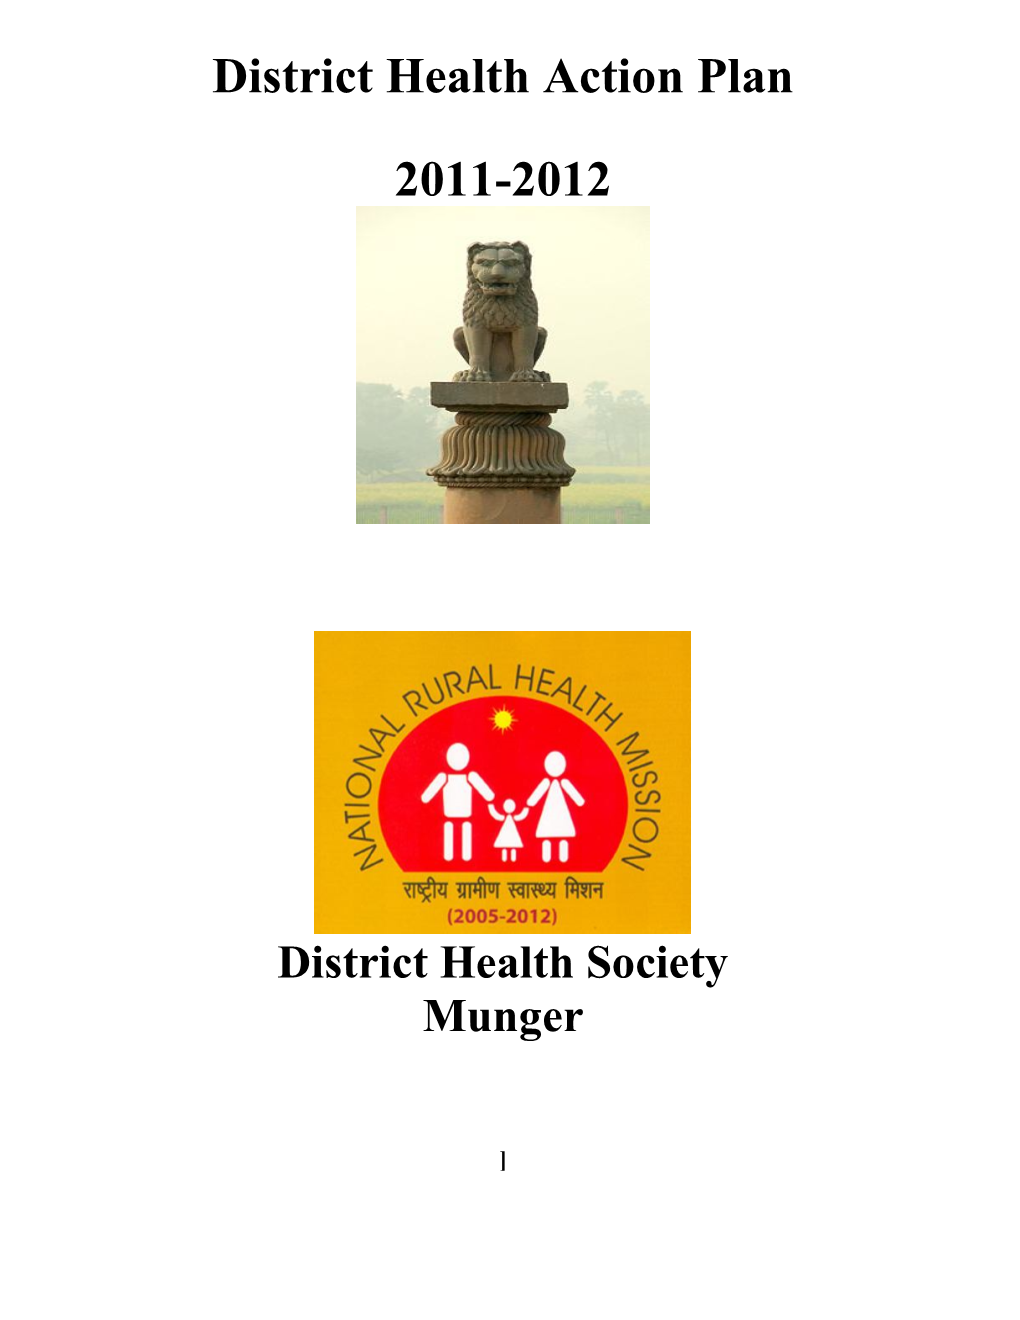 District Health Action Plan 2011-2012